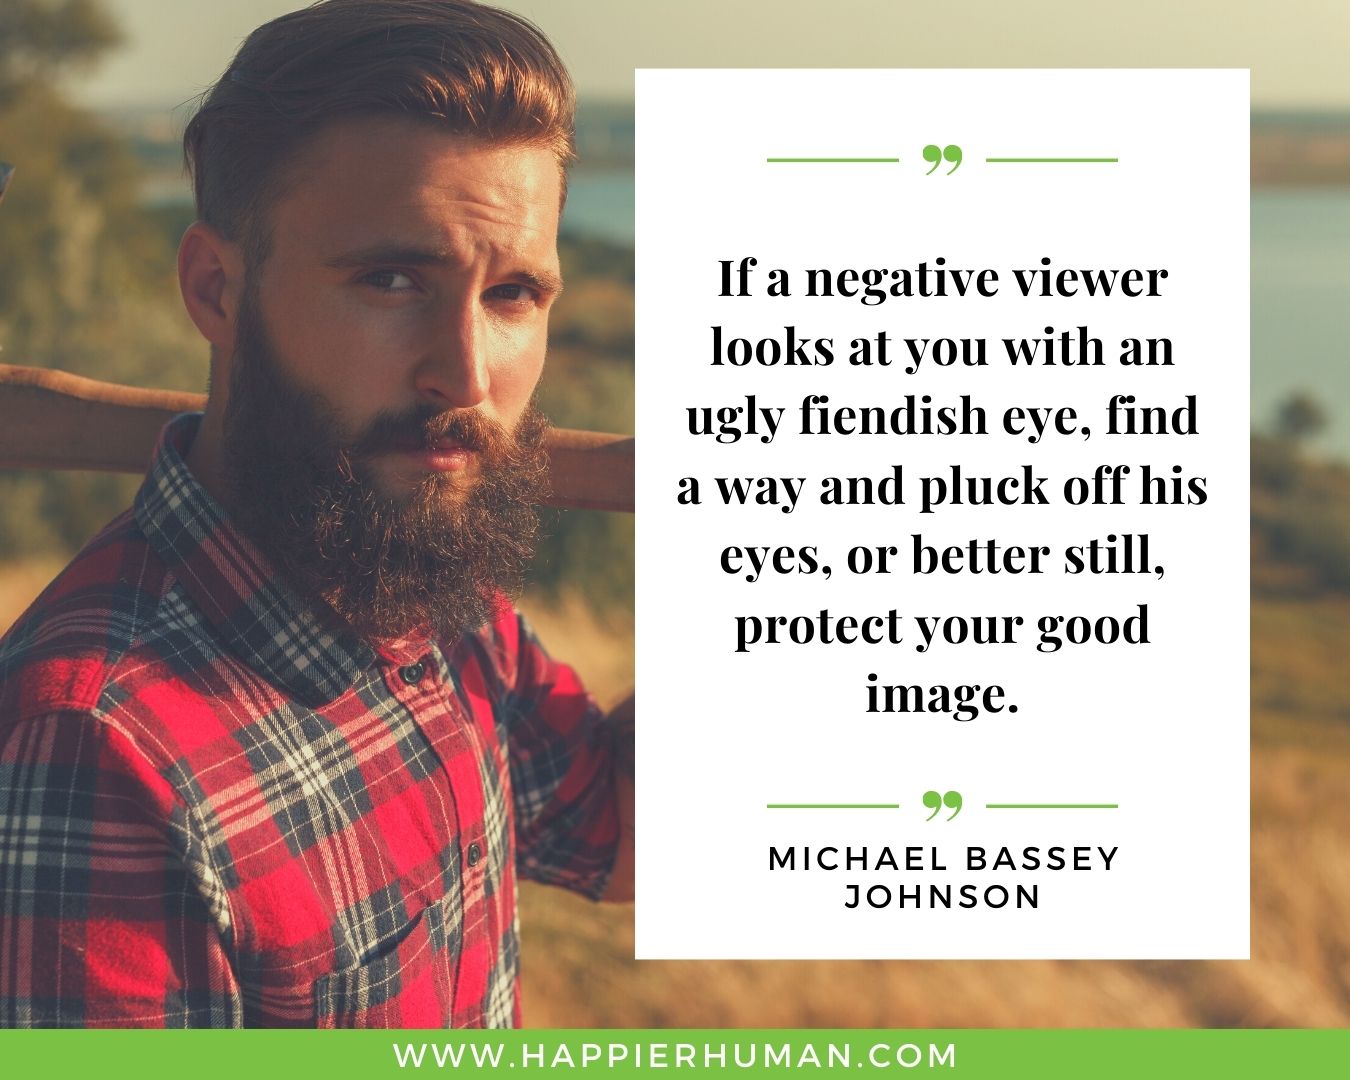 Toxic People Quotes - “If a negative viewer looks at you with an ugly fiendish eye, find a way and pluck off his eyes, or better still, protect your good image.” – Michael Bassey Johnson